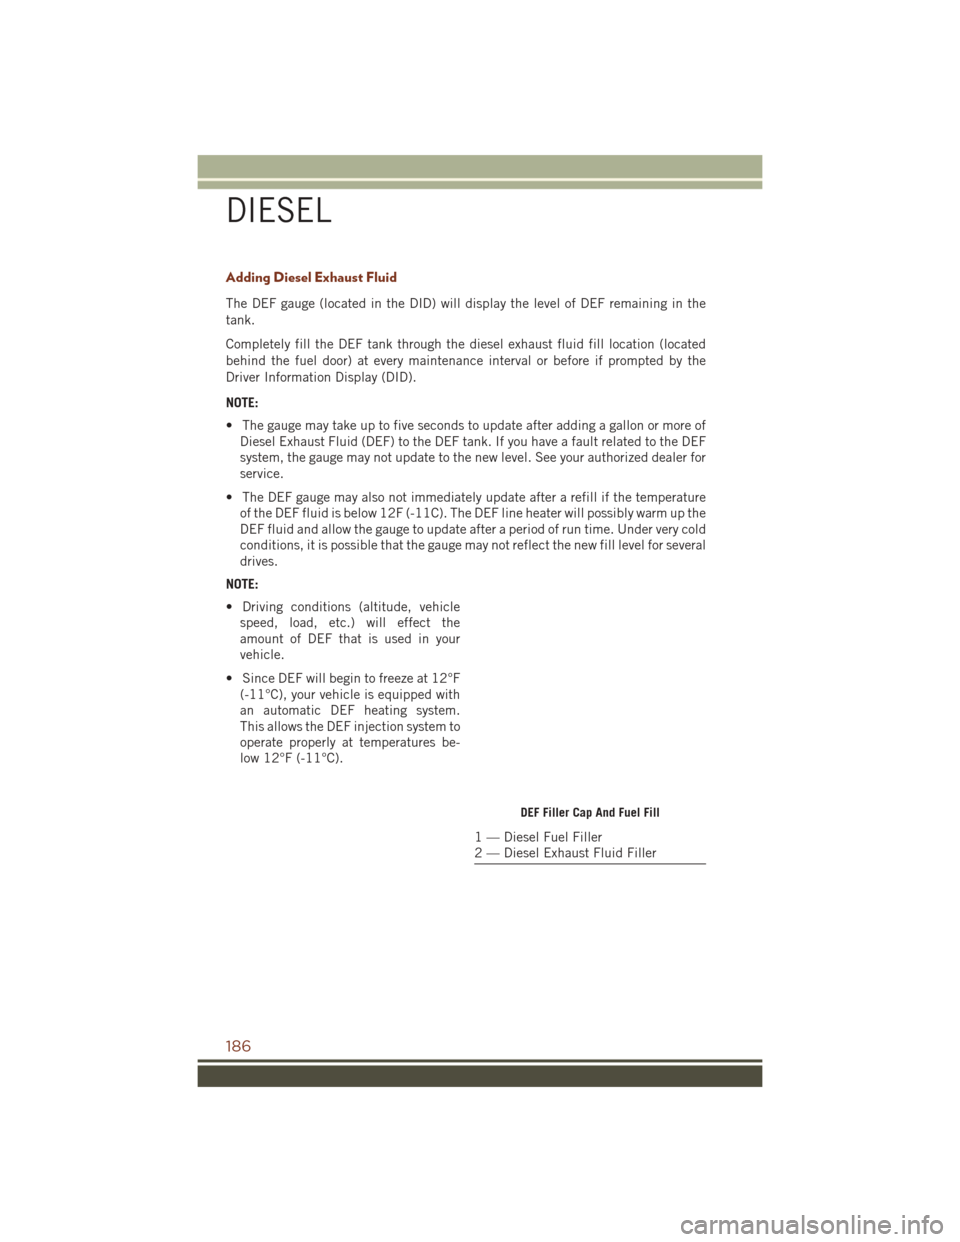 JEEP GRAND CHEROKEE 2016 WK2 / 4.G User Guide Adding Diesel Exhaust Fluid
The DEF gauge (located in the DID) will display the level of DEF remaining in the
tank.
Completely fill the DEF tank through the diesel exhaust fluid fill location (located